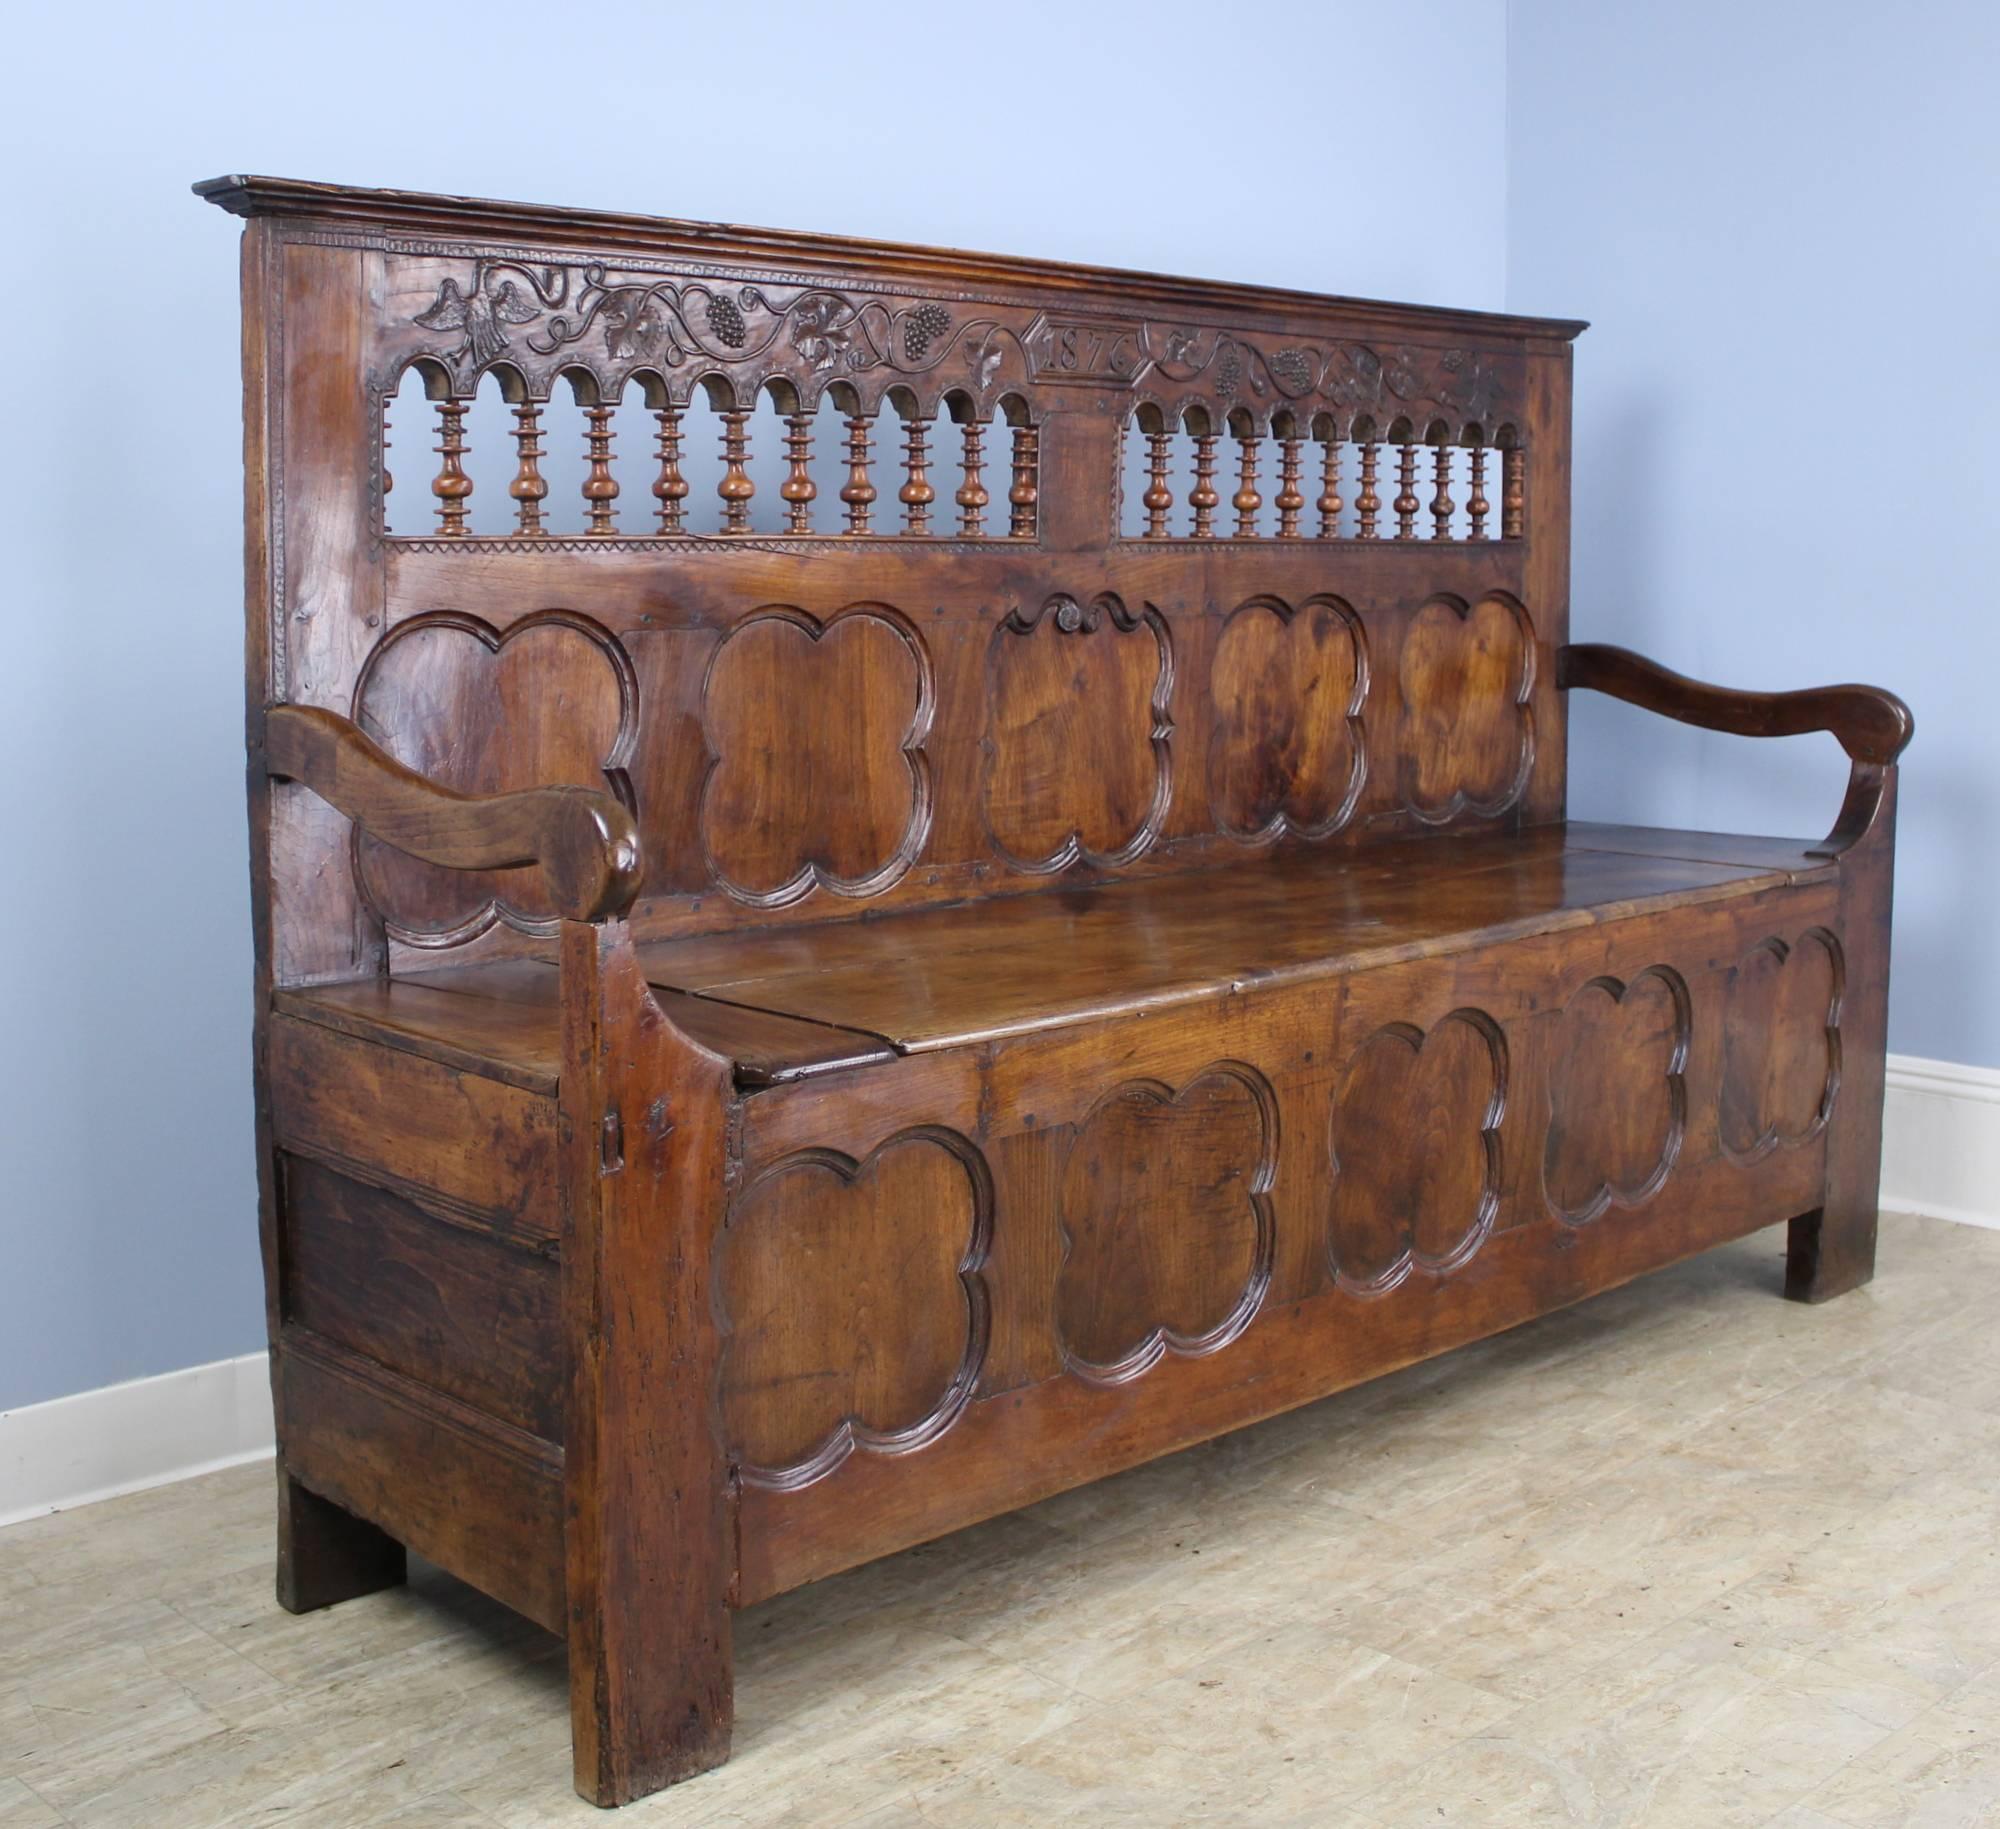 A fabulous ornately carved walnut bench from Coastal France. Charming spindles under a panel of hand carved birds, leaves and grapes, with the date front and centre. The seat lifts up (not hinged) to reveal a large storage area. The repeating clover